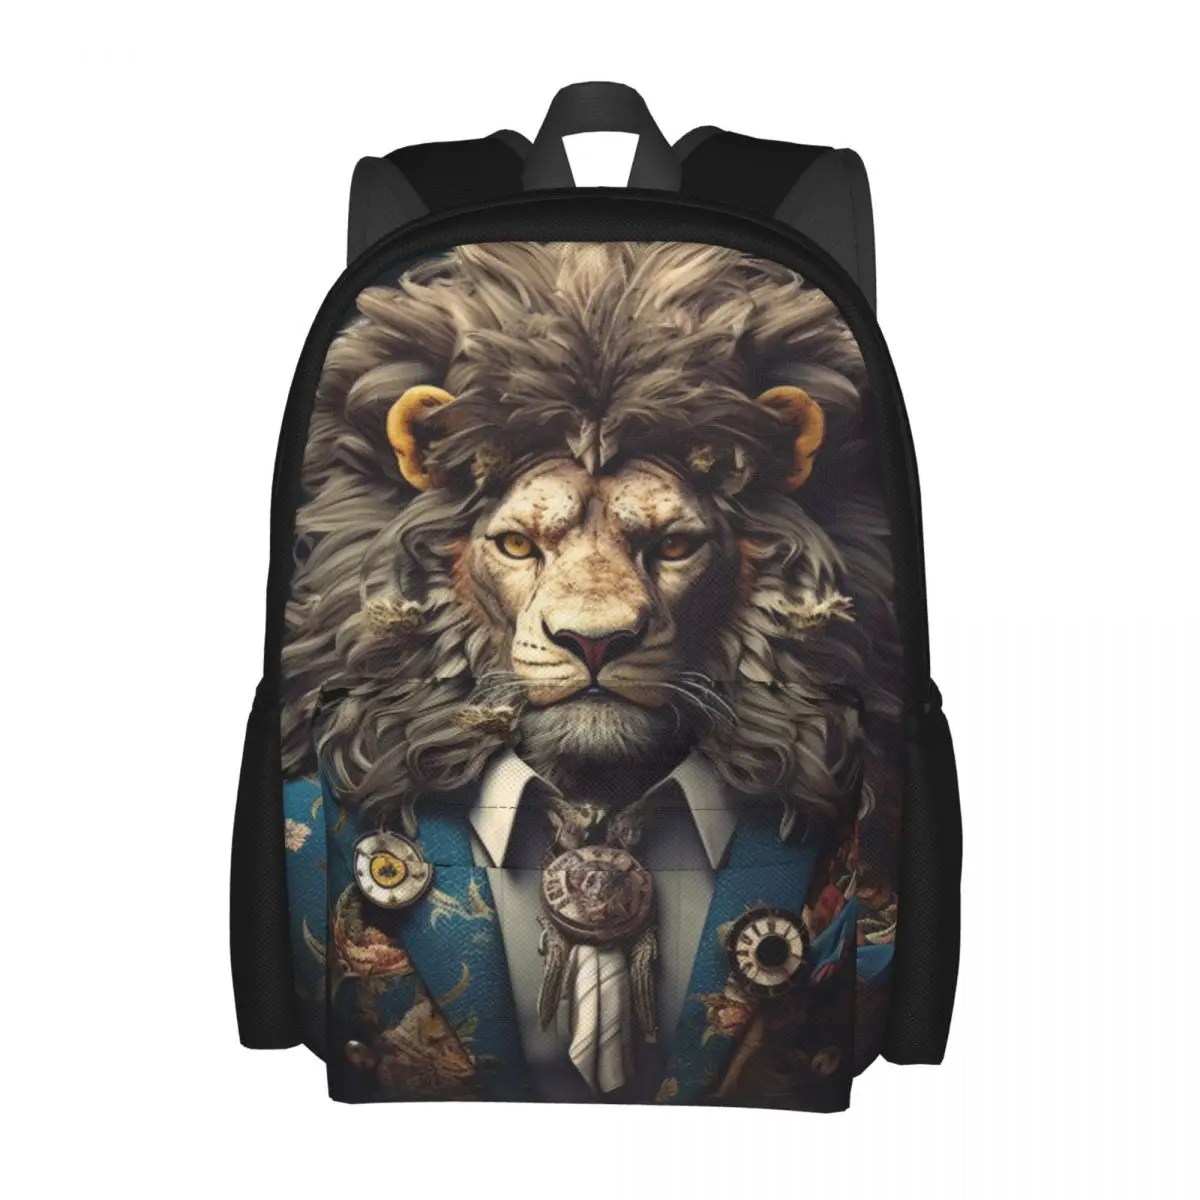 

Lion Backpack Amazing Portraits Dapper Clothing Pretty Backpacks Youth Hiking Breathable School Bags Colorful Rucksack